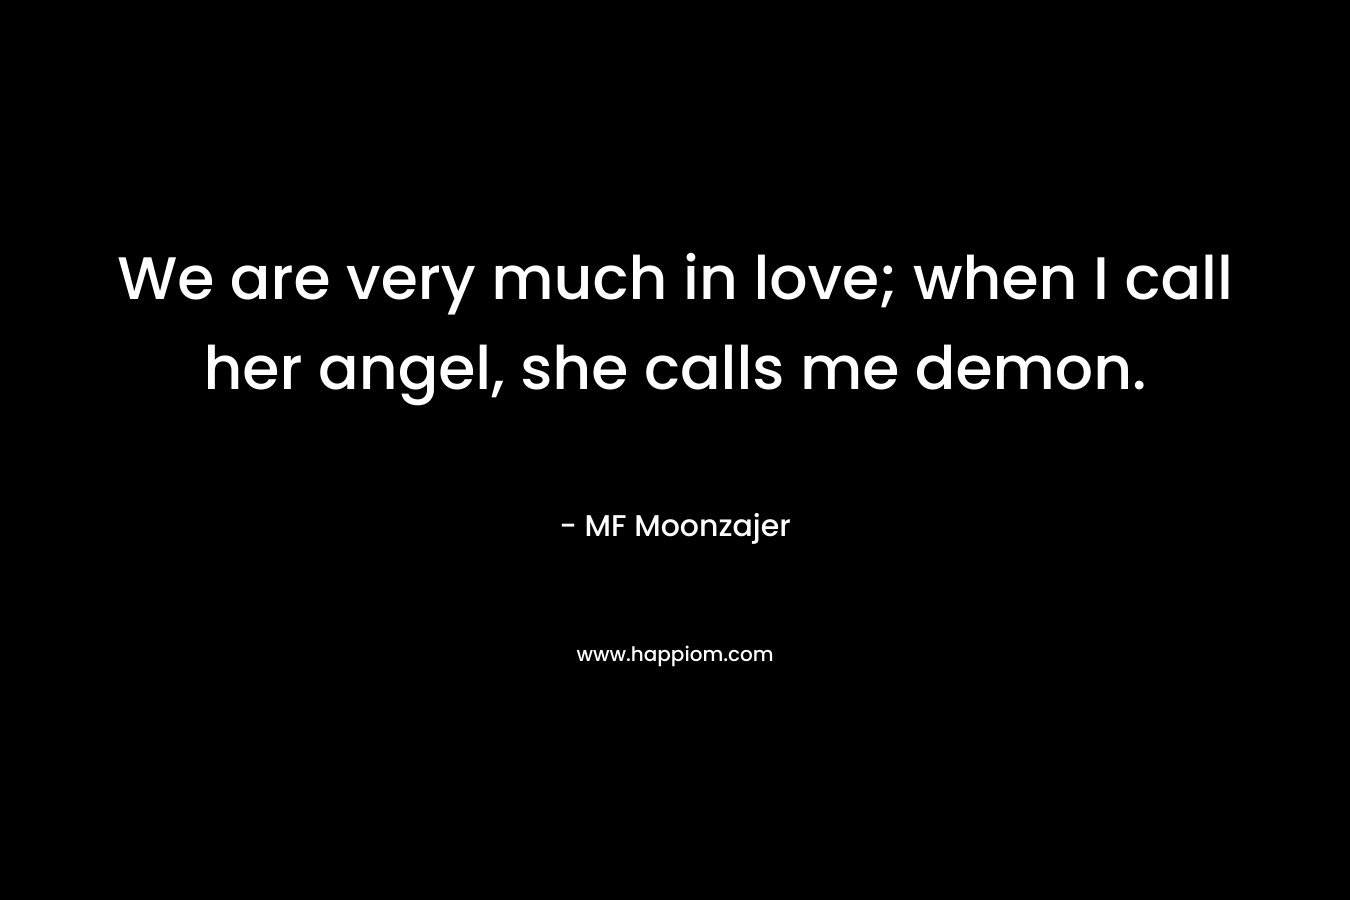 We are very much in love; when I call her angel, she calls me demon. – MF Moonzajer